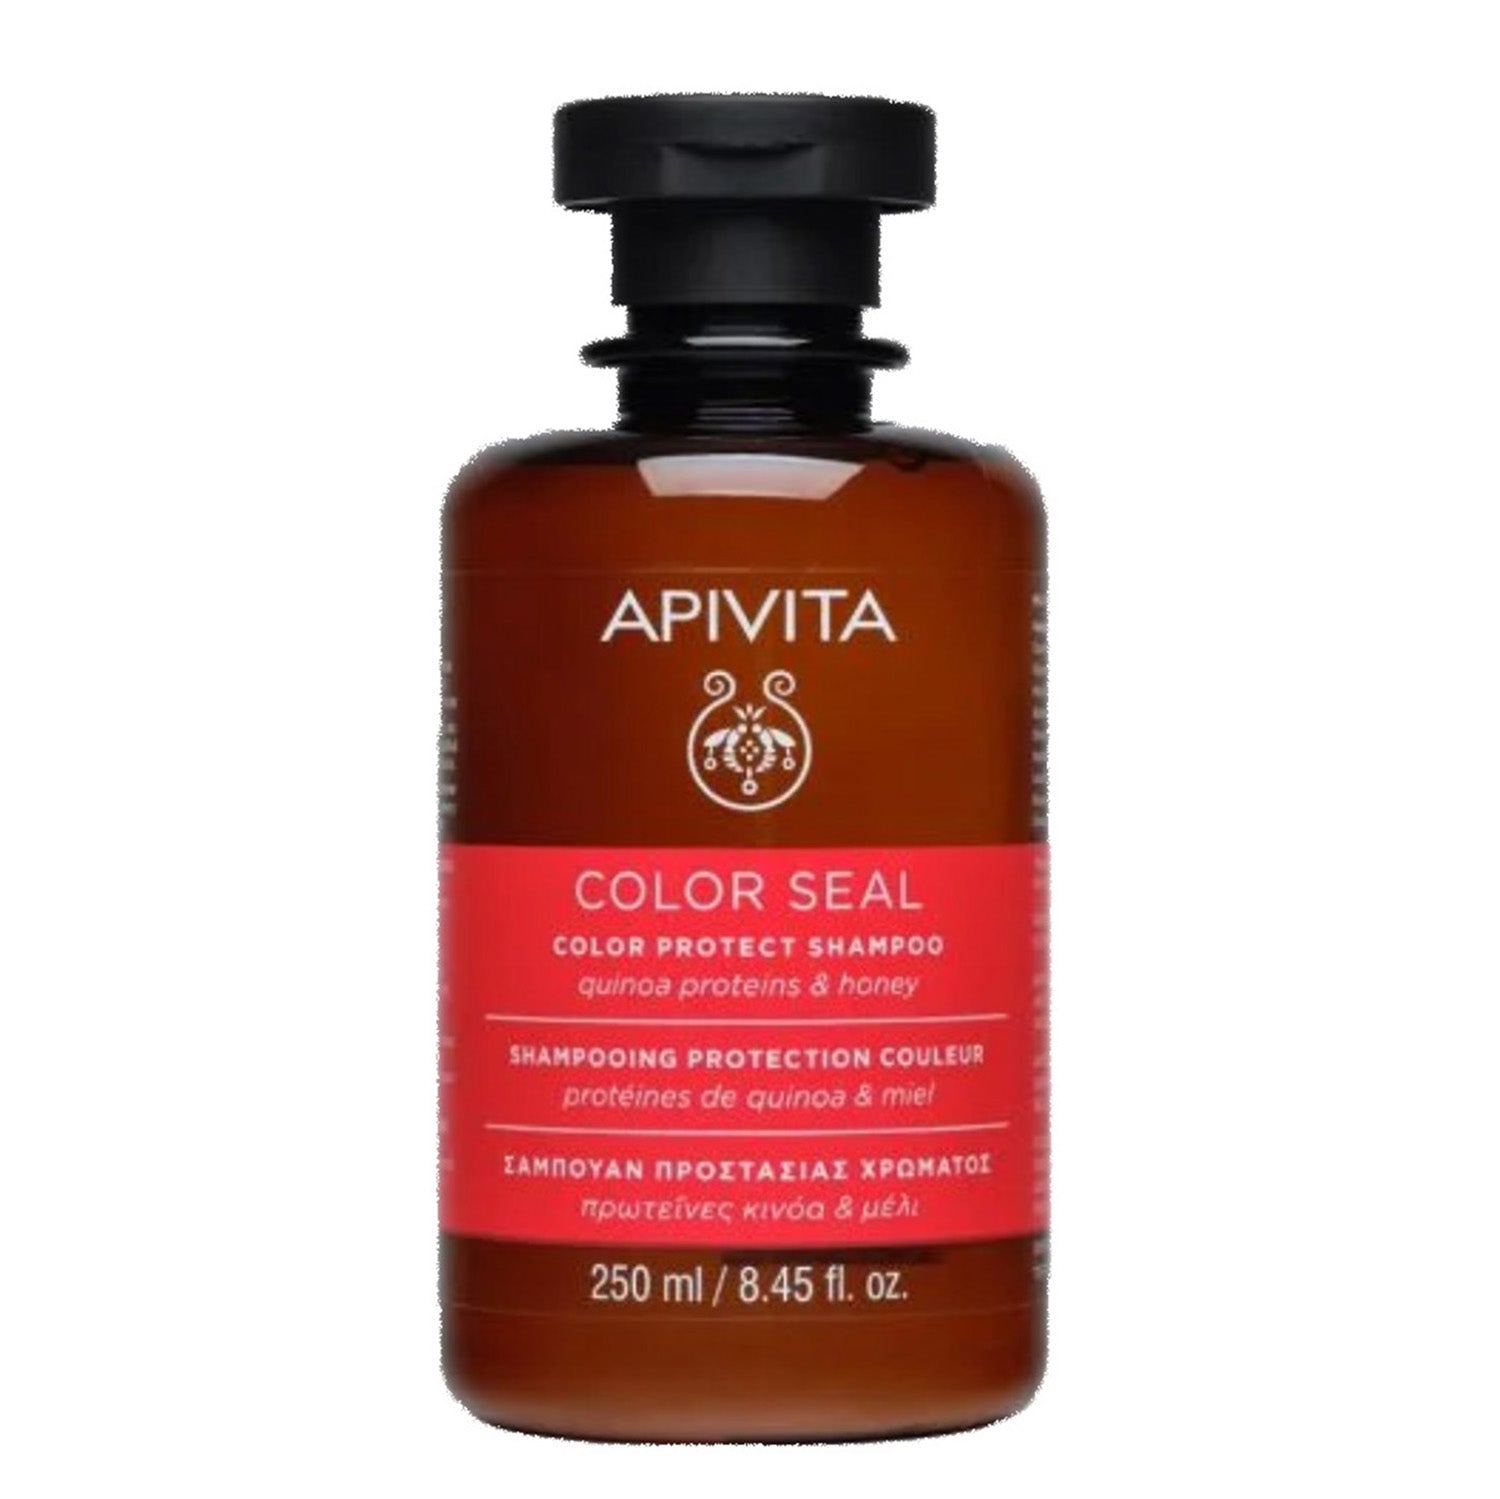 Apivita Colour Seal Shampoo with Quinoa, Protein & Honey contains 95% natural origin ingredients for gentle cleansing. It preserves and enhances the natural vibrancy of coloured hair, while respecting the scalp's natural flora without the use of sulfates. 